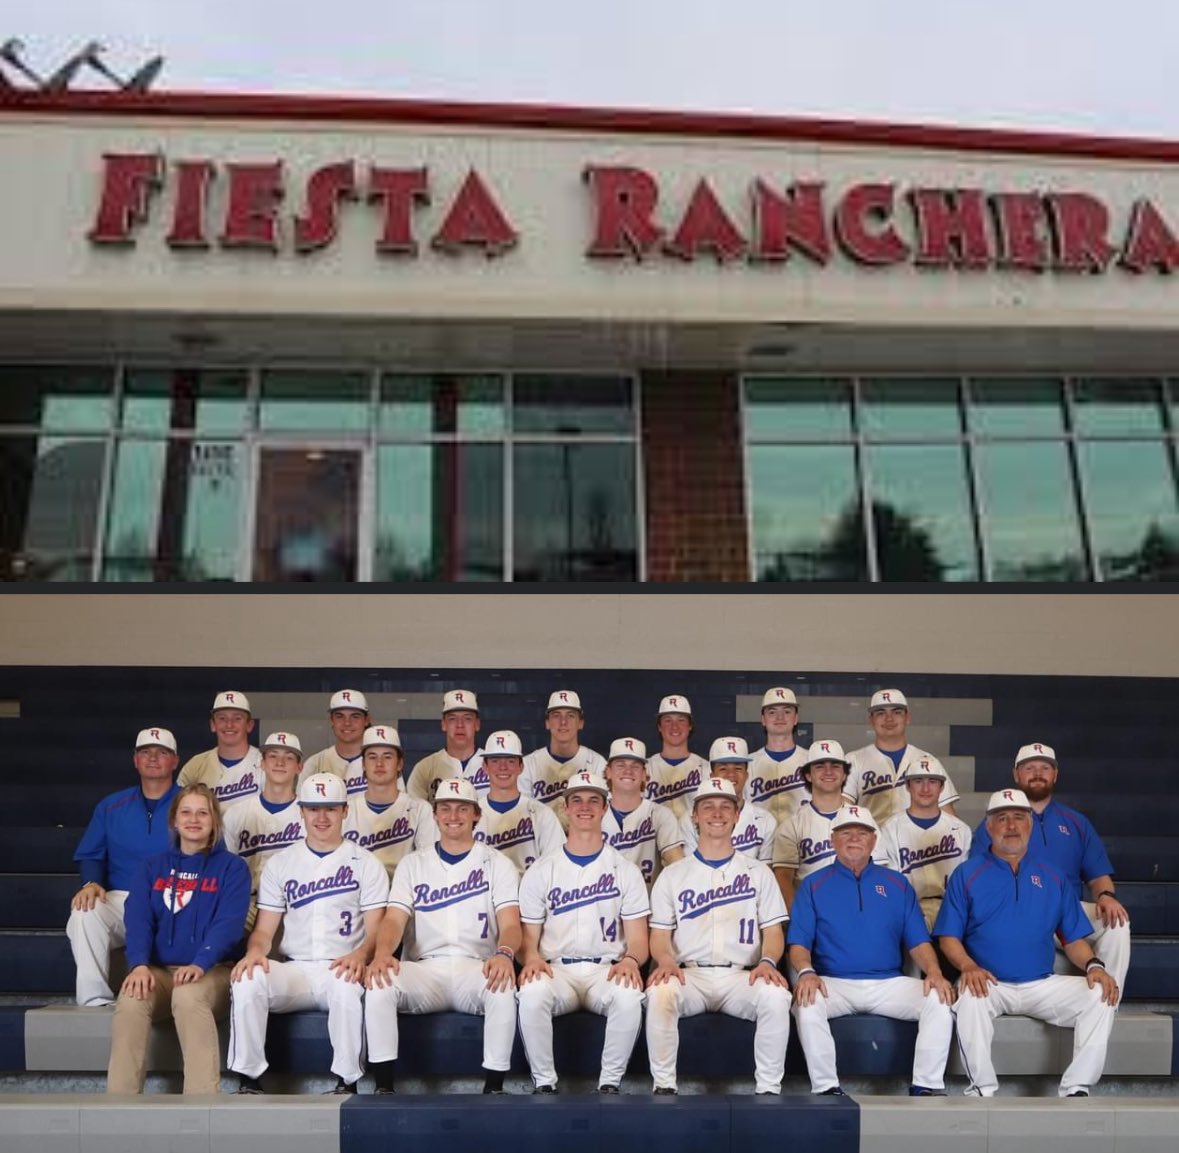 Today there is a Dine to Donate for the Roncalli baseball team at Fiesta Ranchera {1450 W. Southport Road}! 10% of total sales for the entire day will be donated from 11 AM- 10 PM, and you can dine-in or carry-out. Just make sure to mention Roncalli baseball when paying.